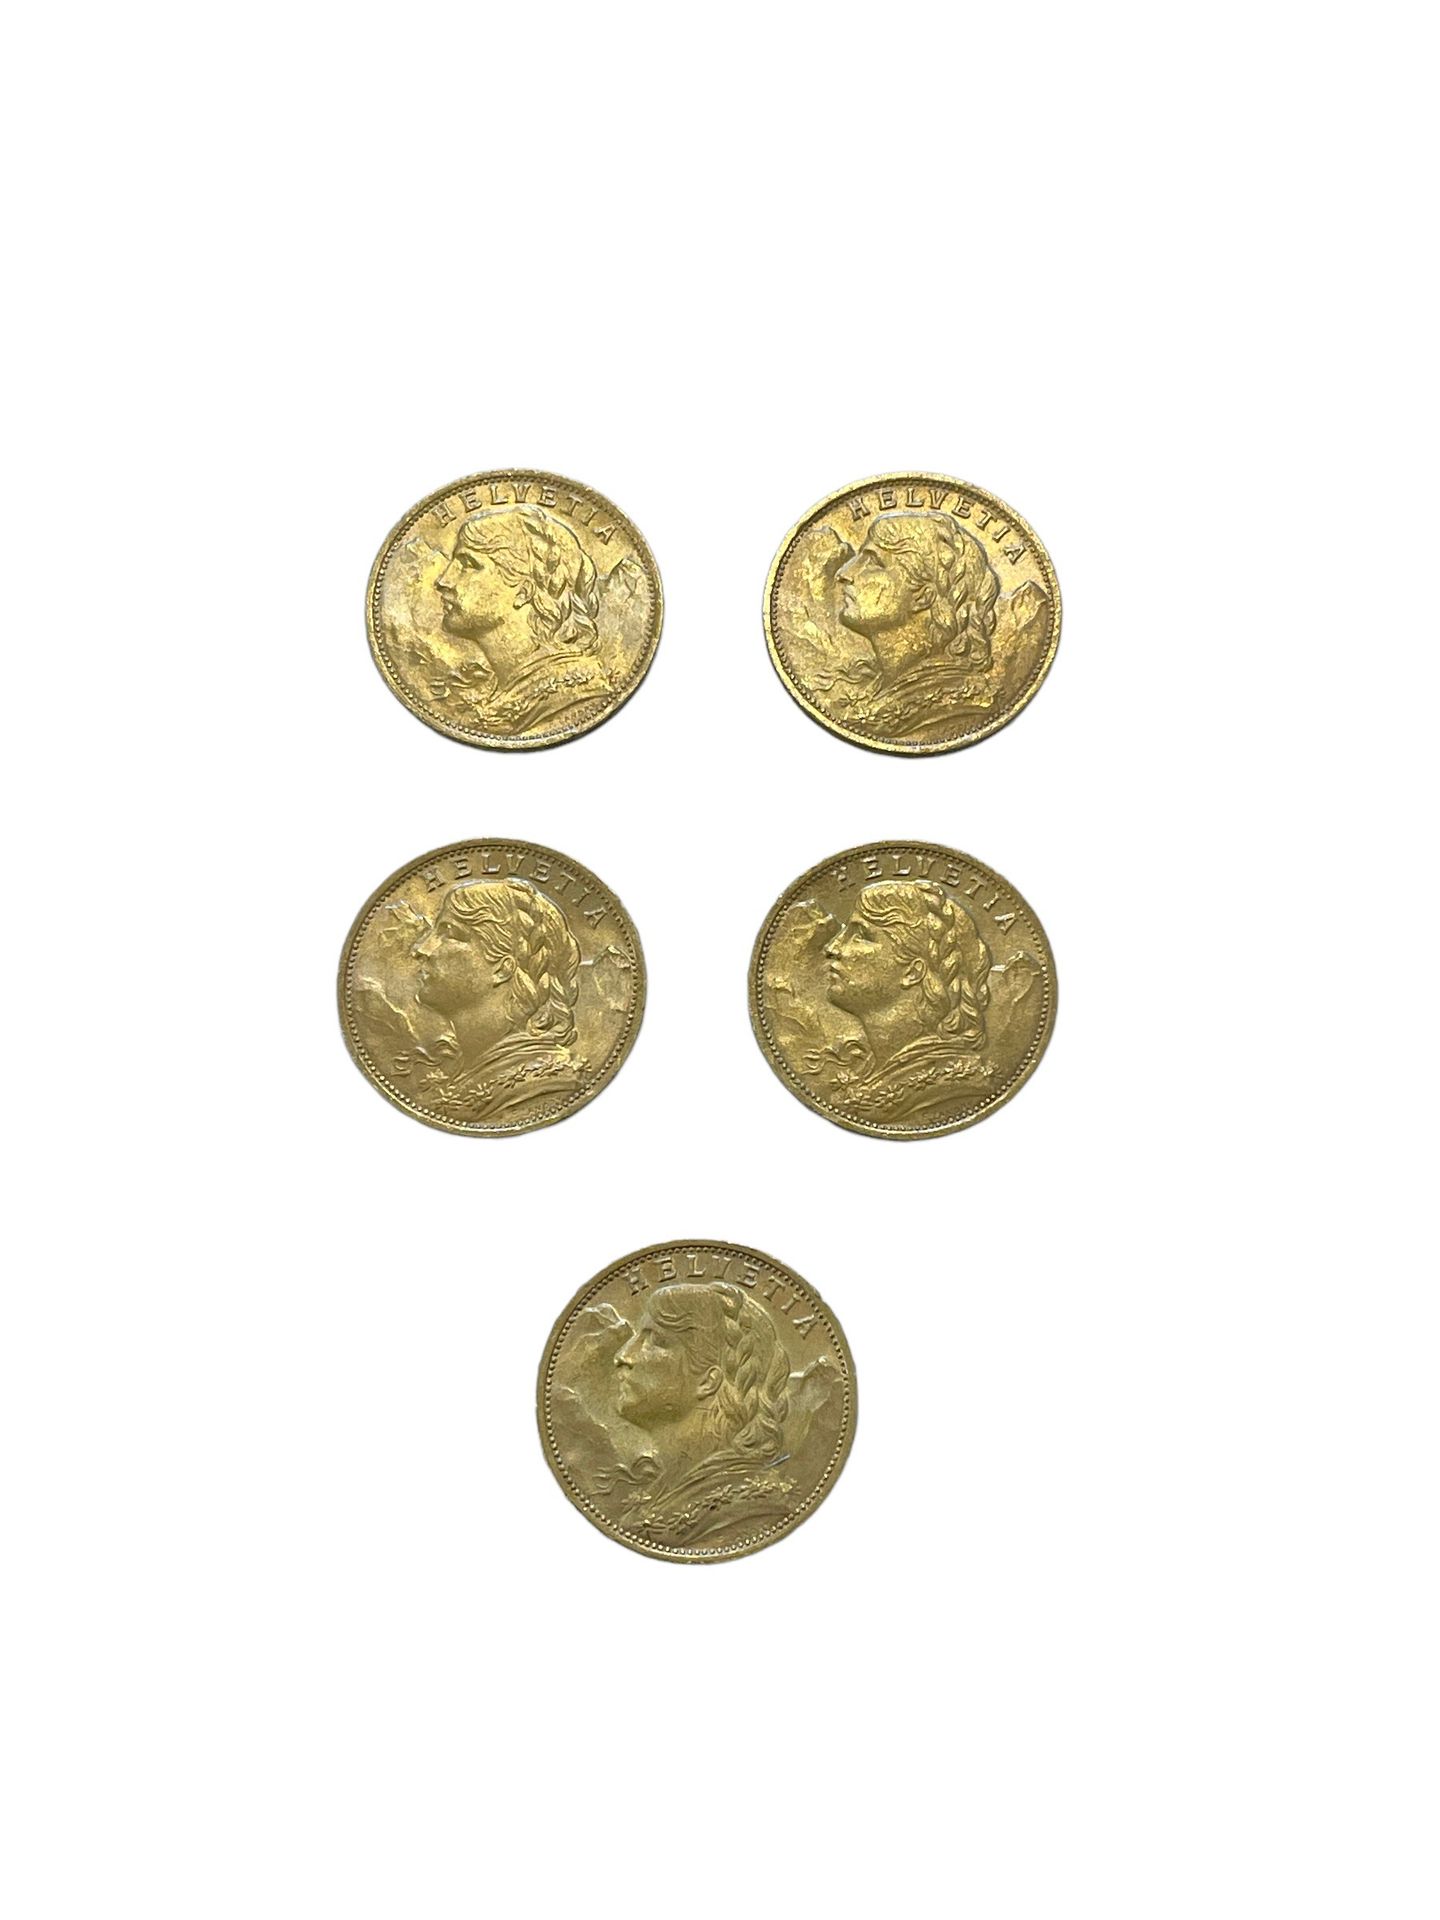 Null SWITZERLAND
5 coins 20 francs gold
Weight : 32.2 g